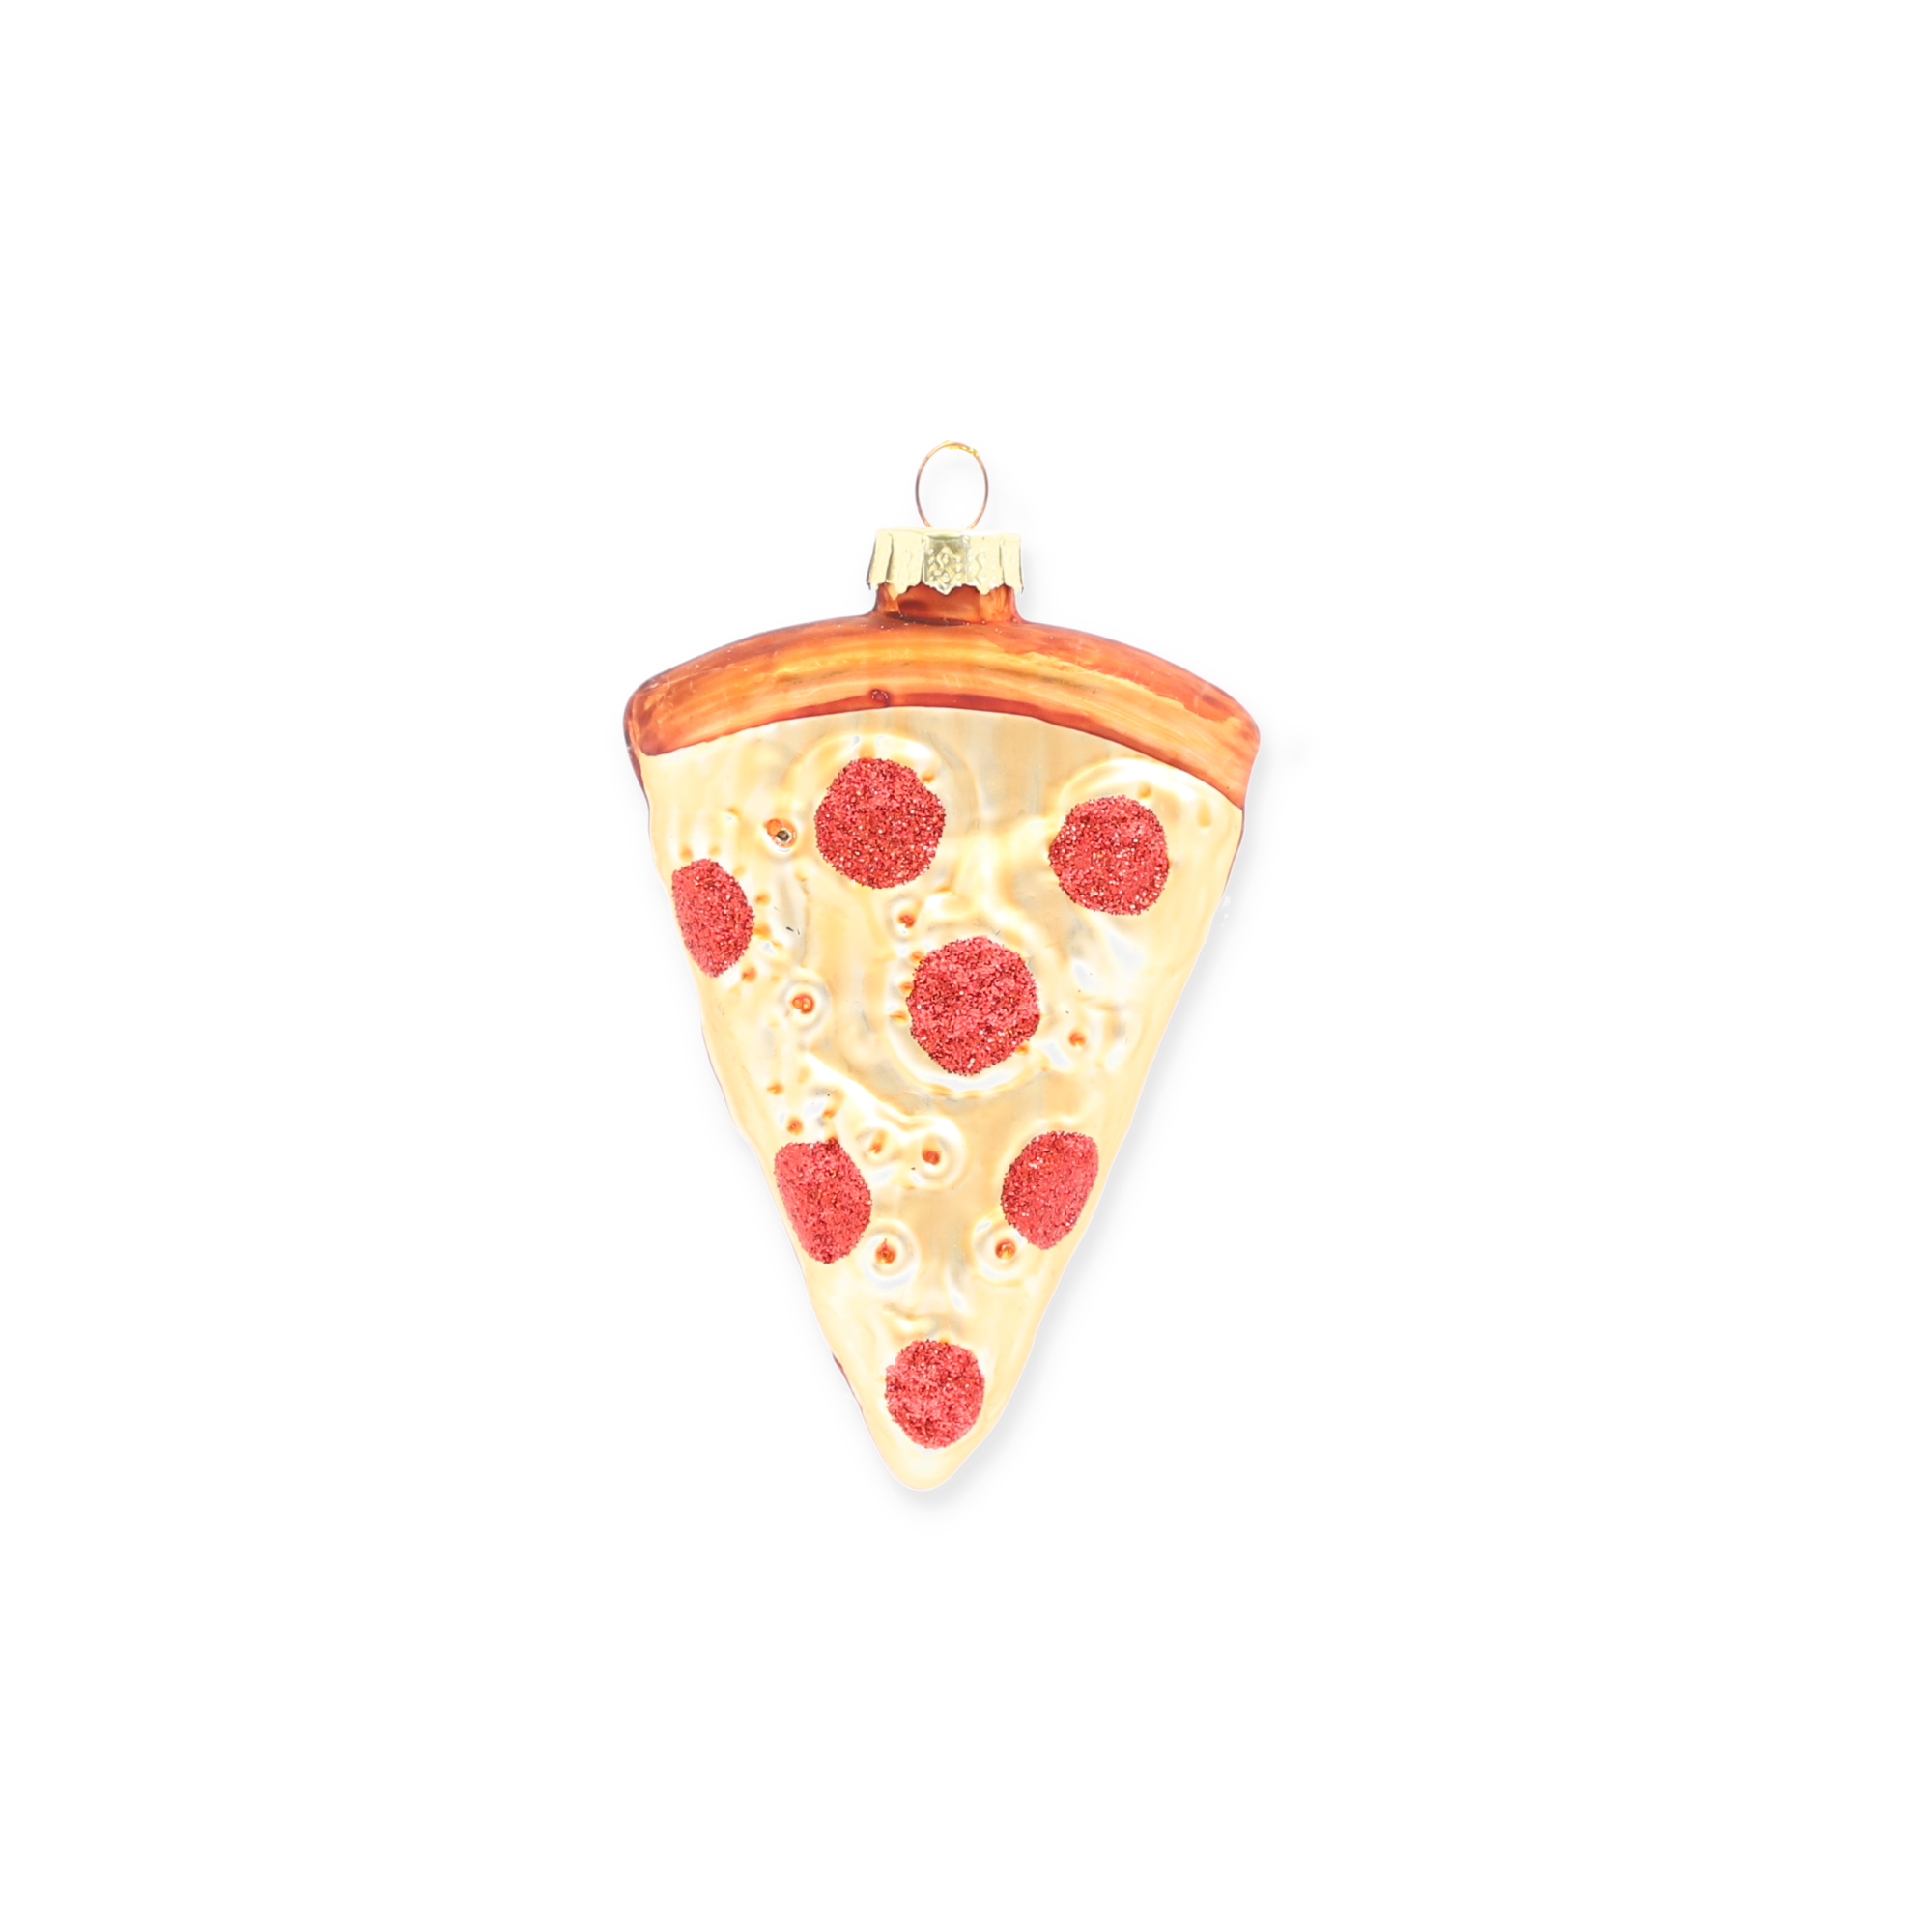 Christbaumschmuck Pizza gelb/rot 7 x 10,3 cm + product picture